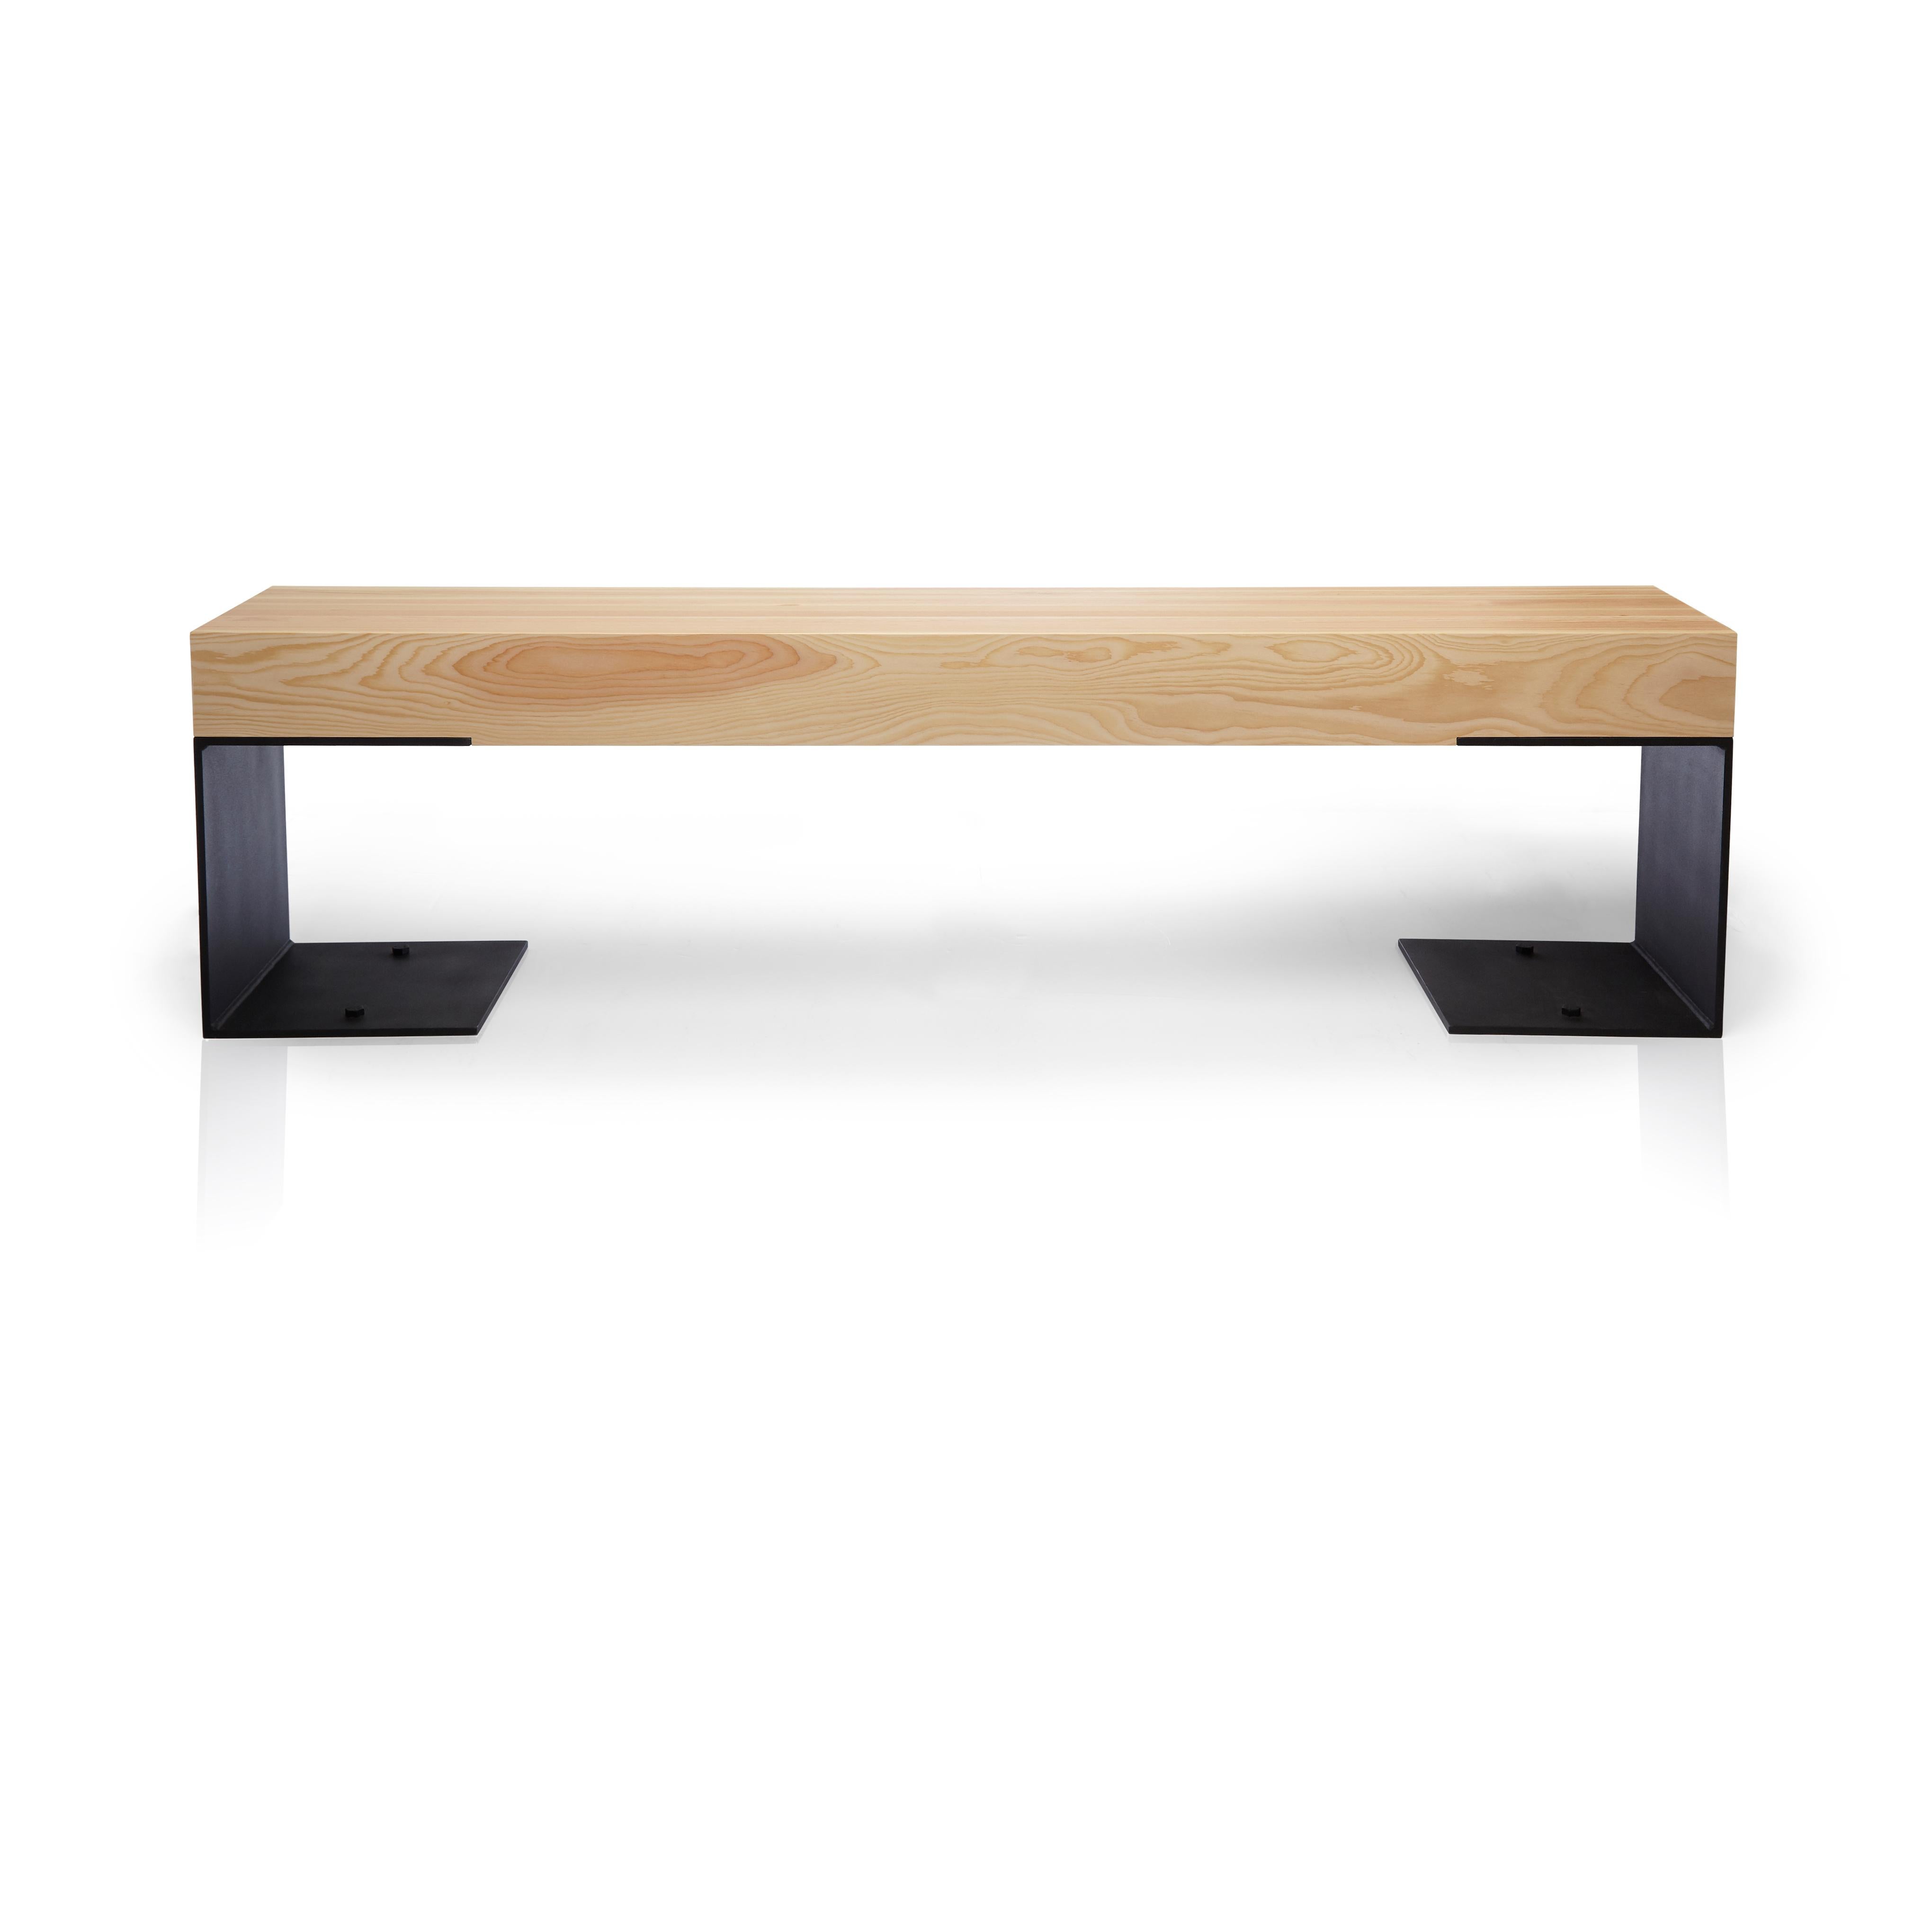 Canadian Kai Torched Solid Oak Wood and Steel Hallway Bench by Autonomous Furniture For Sale